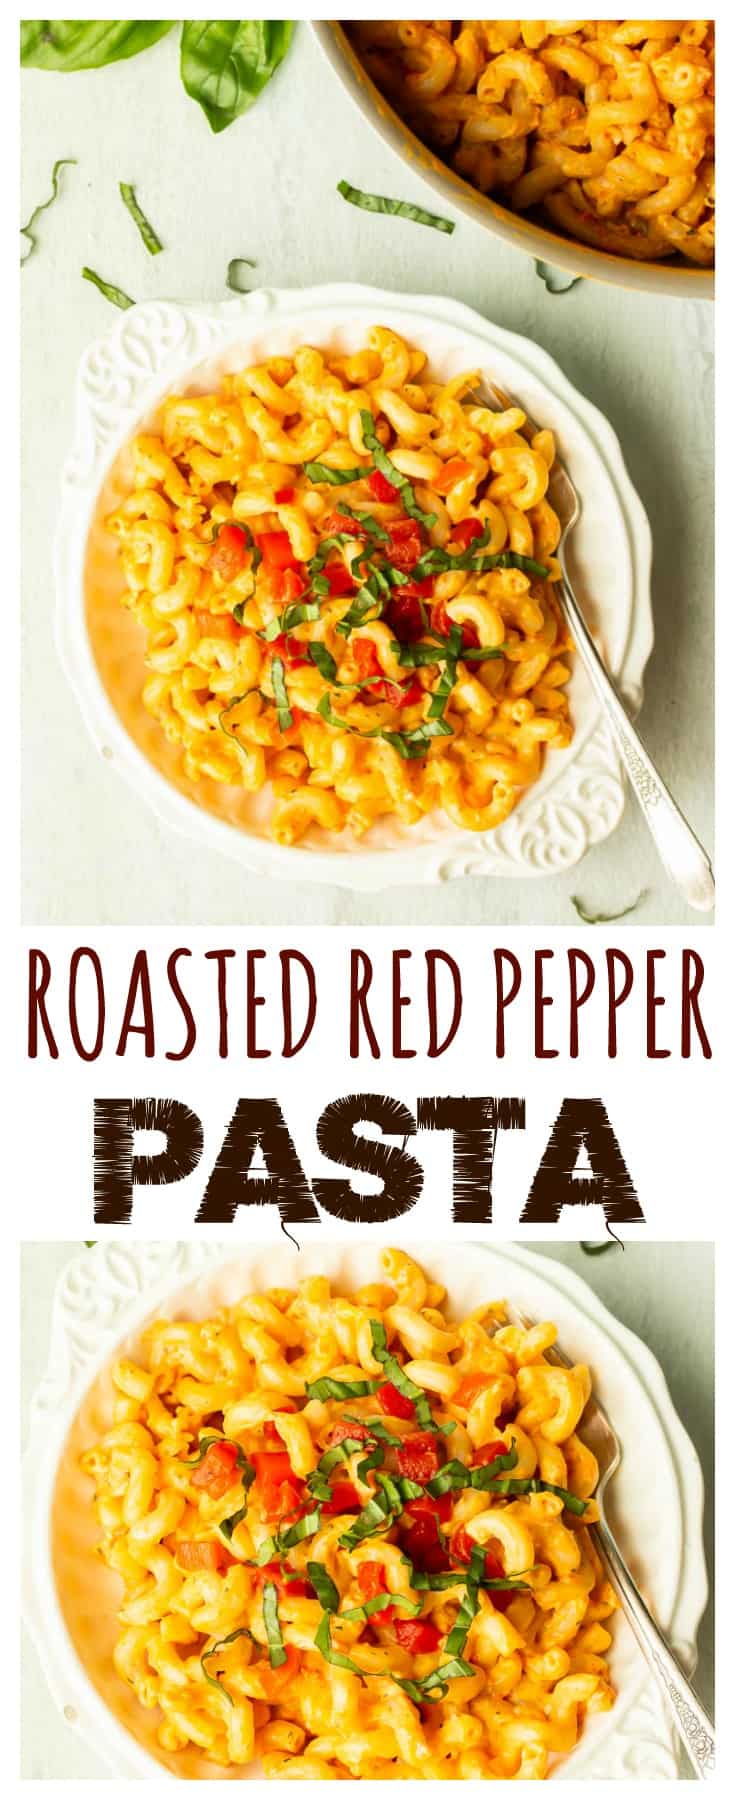 Creamy Roasted Red Pepper Pasta - Delicious Little Bites